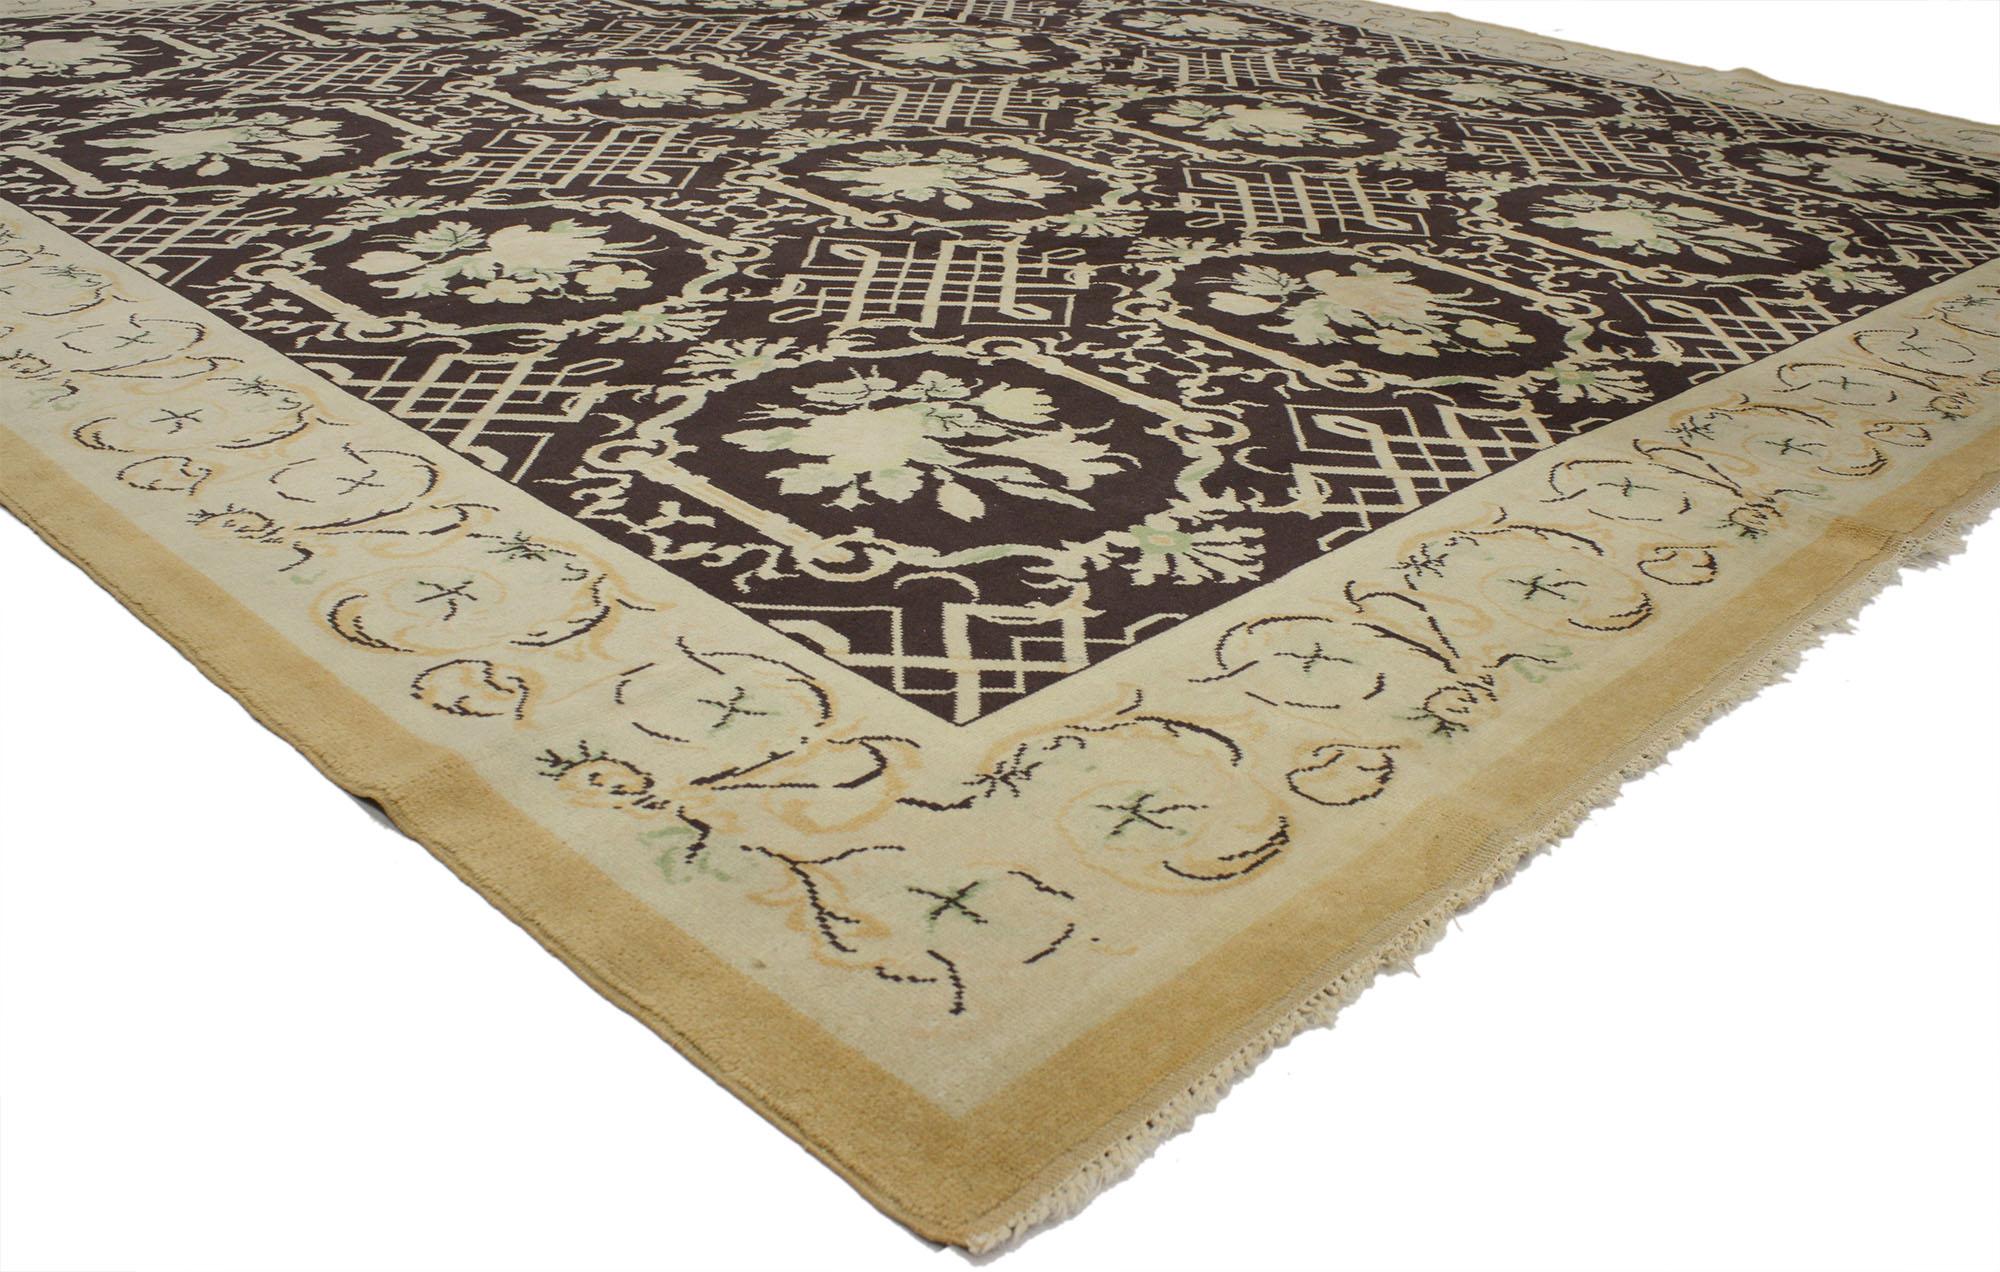 77078 Vintage European Garden Rug With Earth-Tone Colors - 10'08 X 10'10.  Warm and inviting with earth-tone colors, this hand-knotted wool vintage European rug is classic example of a garden trellis design with Romantic Renaissance Style. It